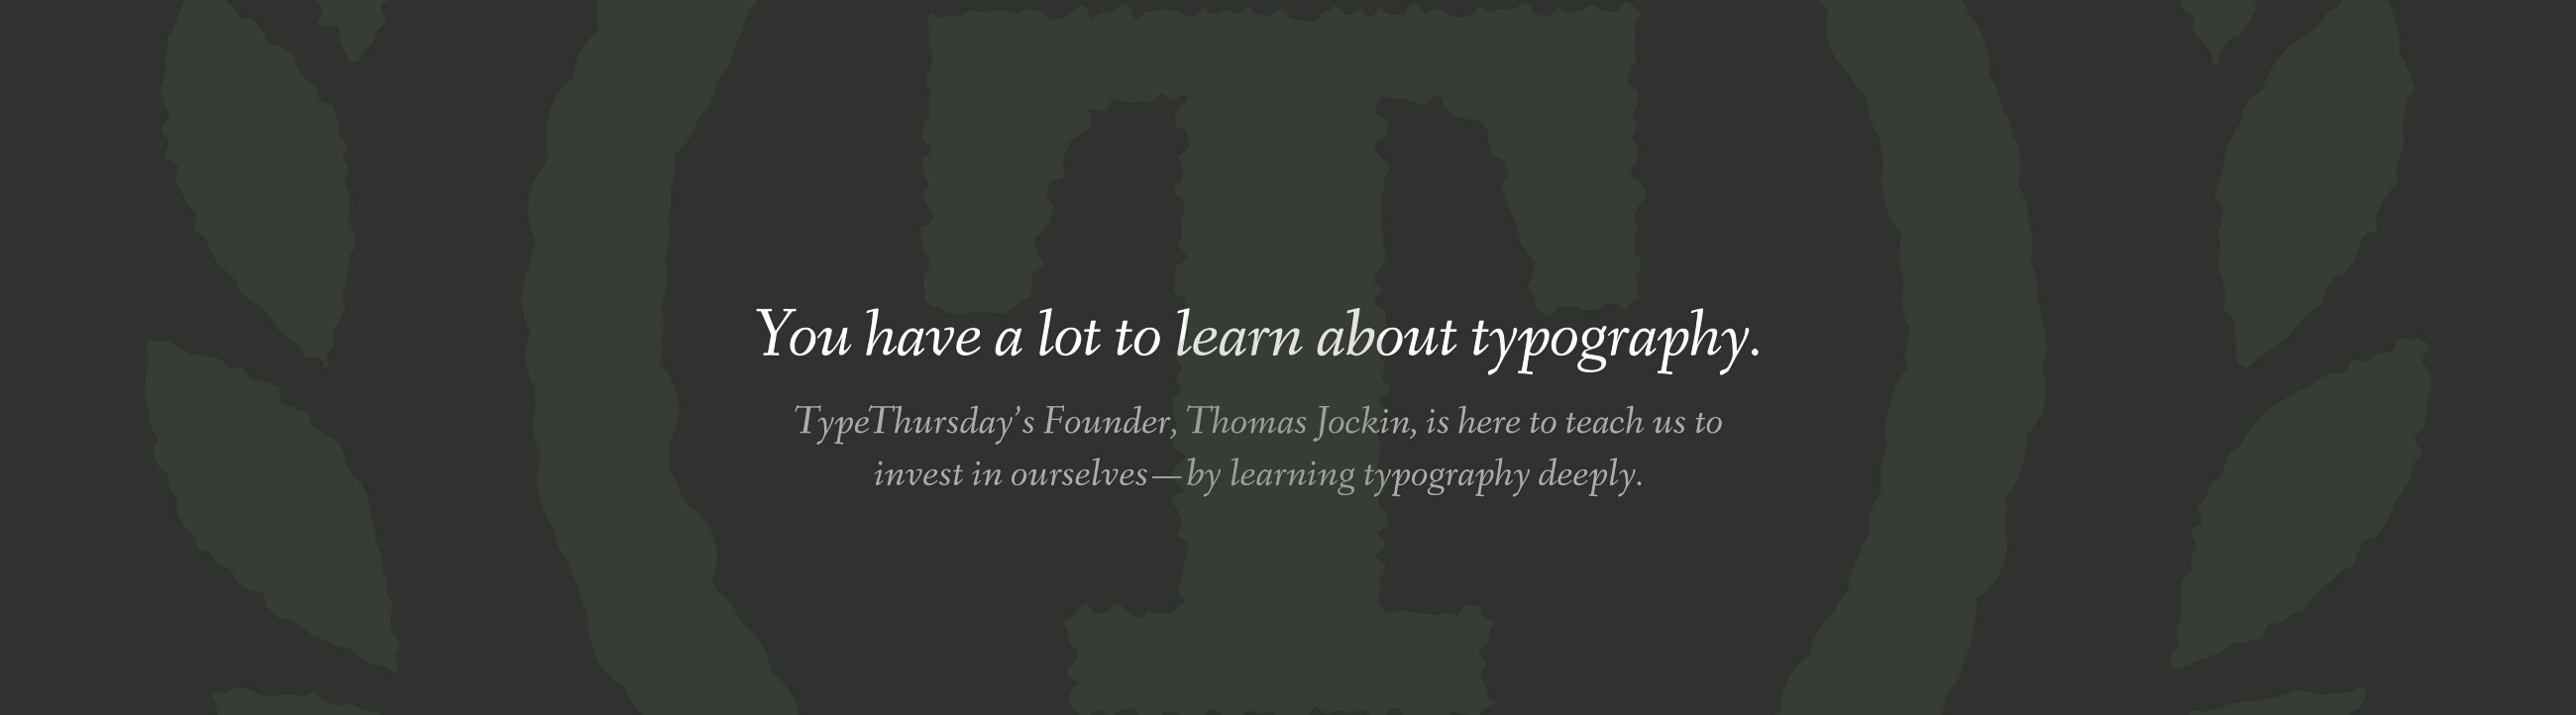 You have a lot to learn about typography.